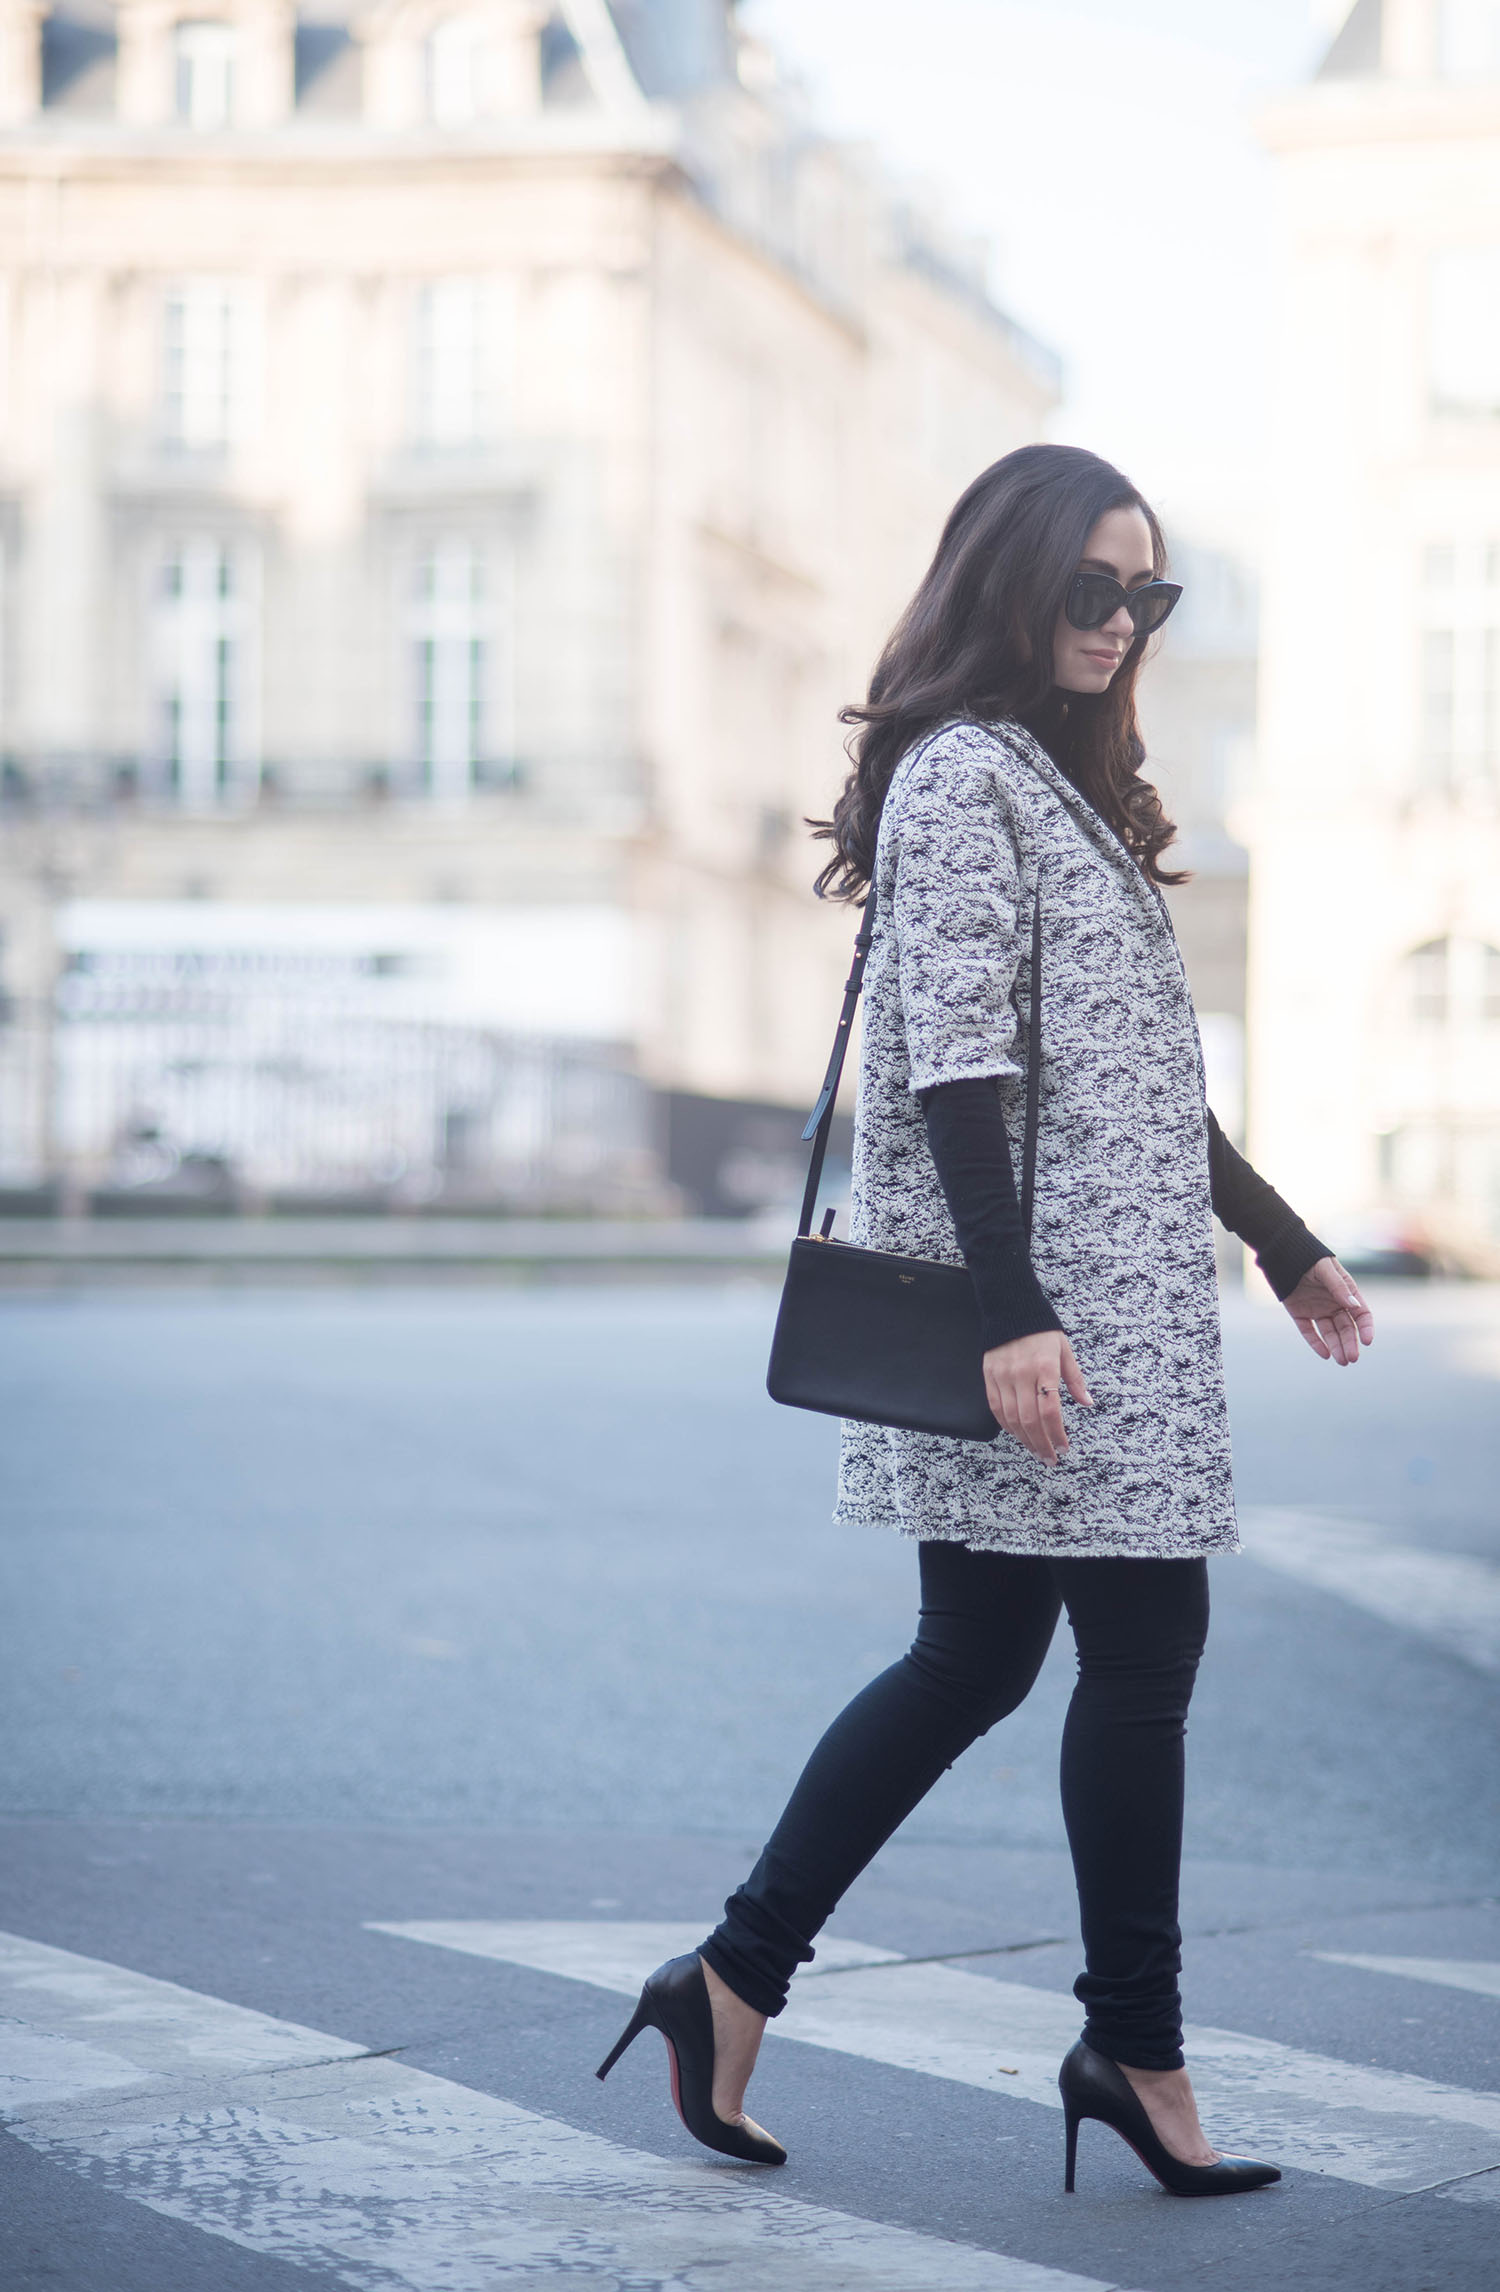 Fashion blogger Cee Fardoe of Coco & Vera crosses the street at Place des Victories in Paris carrying a Celine trio bag and wearing Mavi jeans